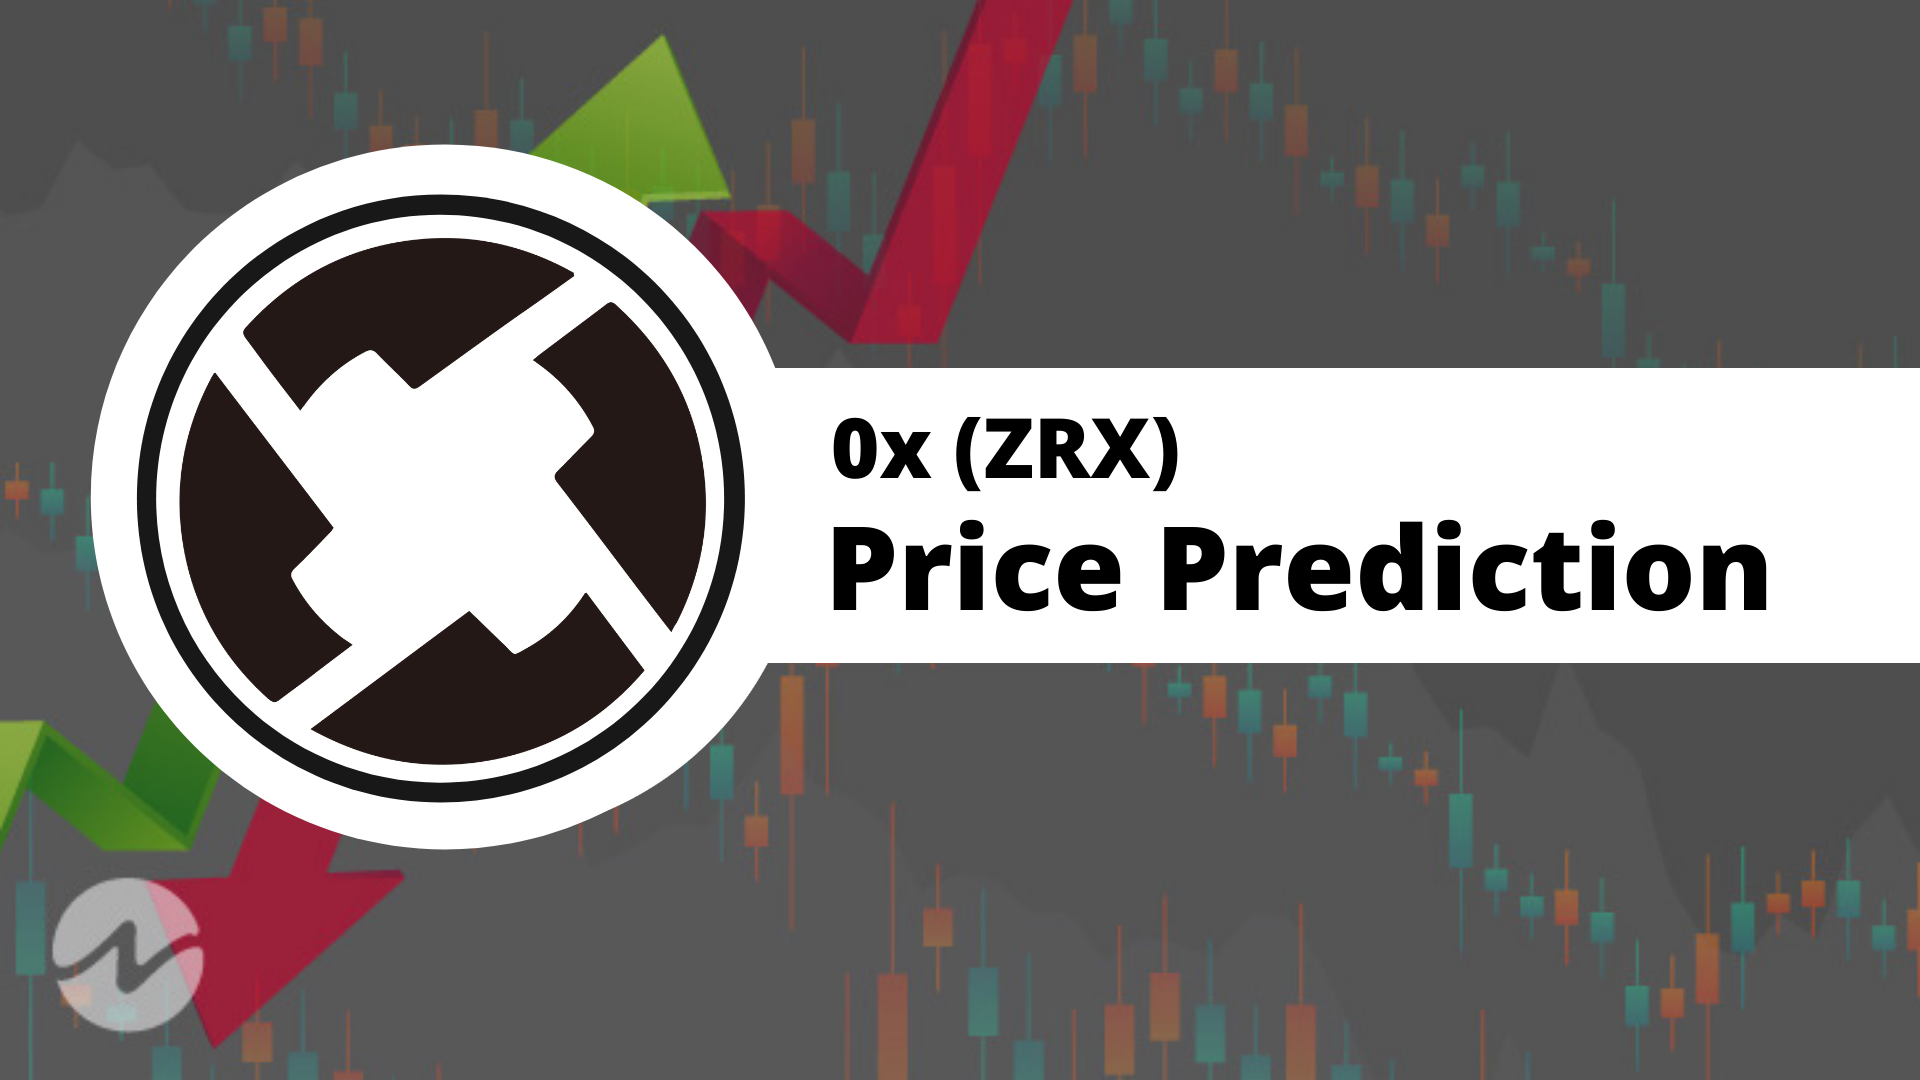 Should You Invest in 0x (ZRX)? Analyzing the ZRX Crypto